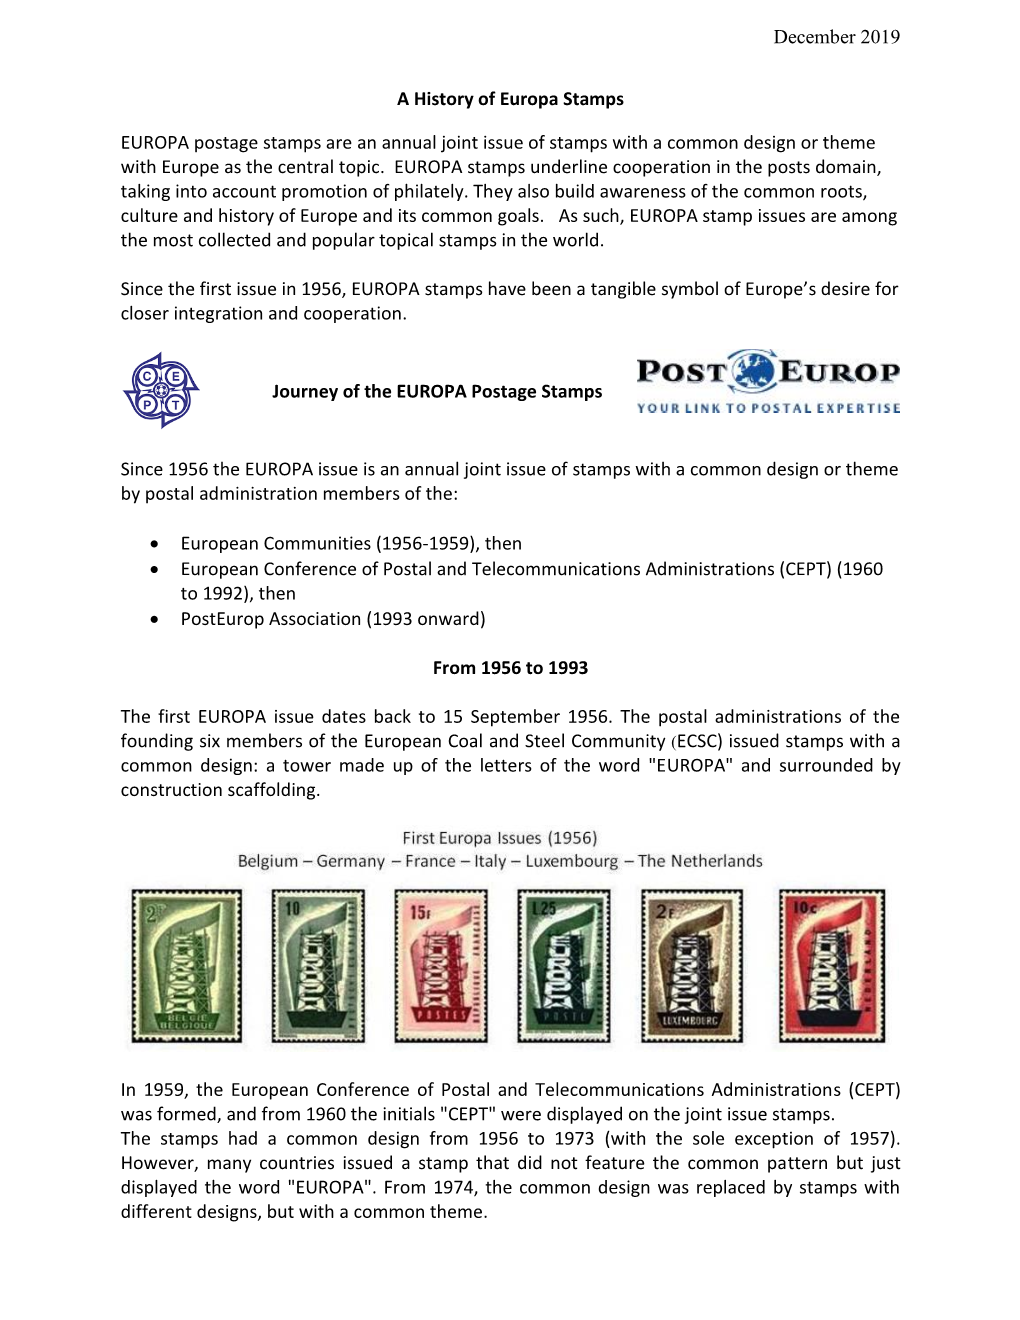 A Brief History of Europa Stamps